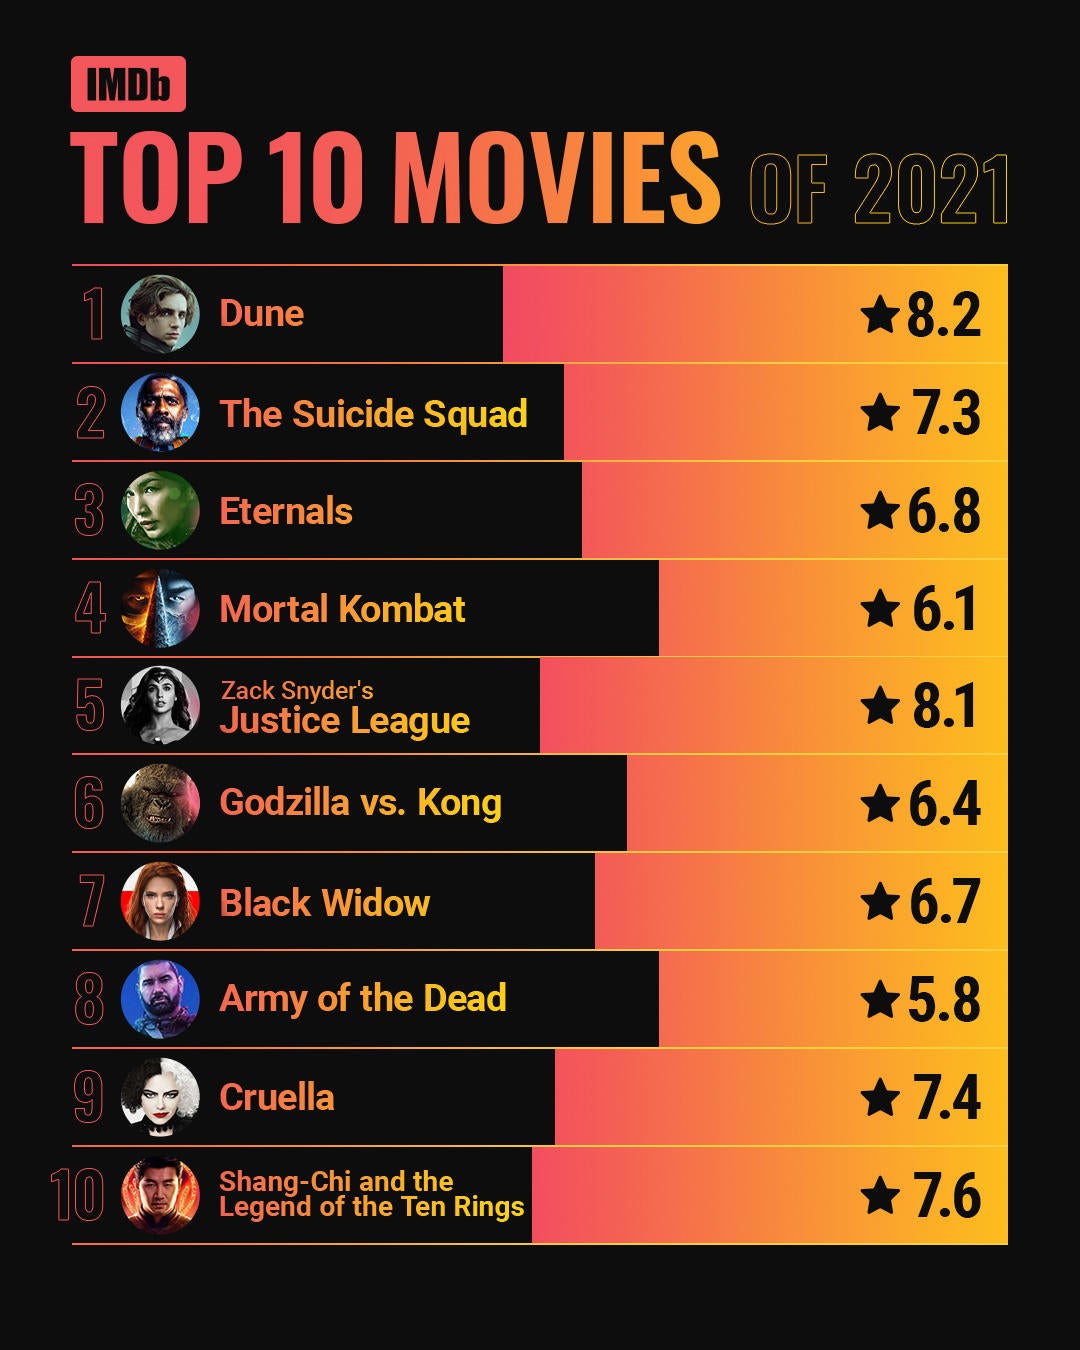 The top 10 best rated MCU movies according to IMDB. Do you all